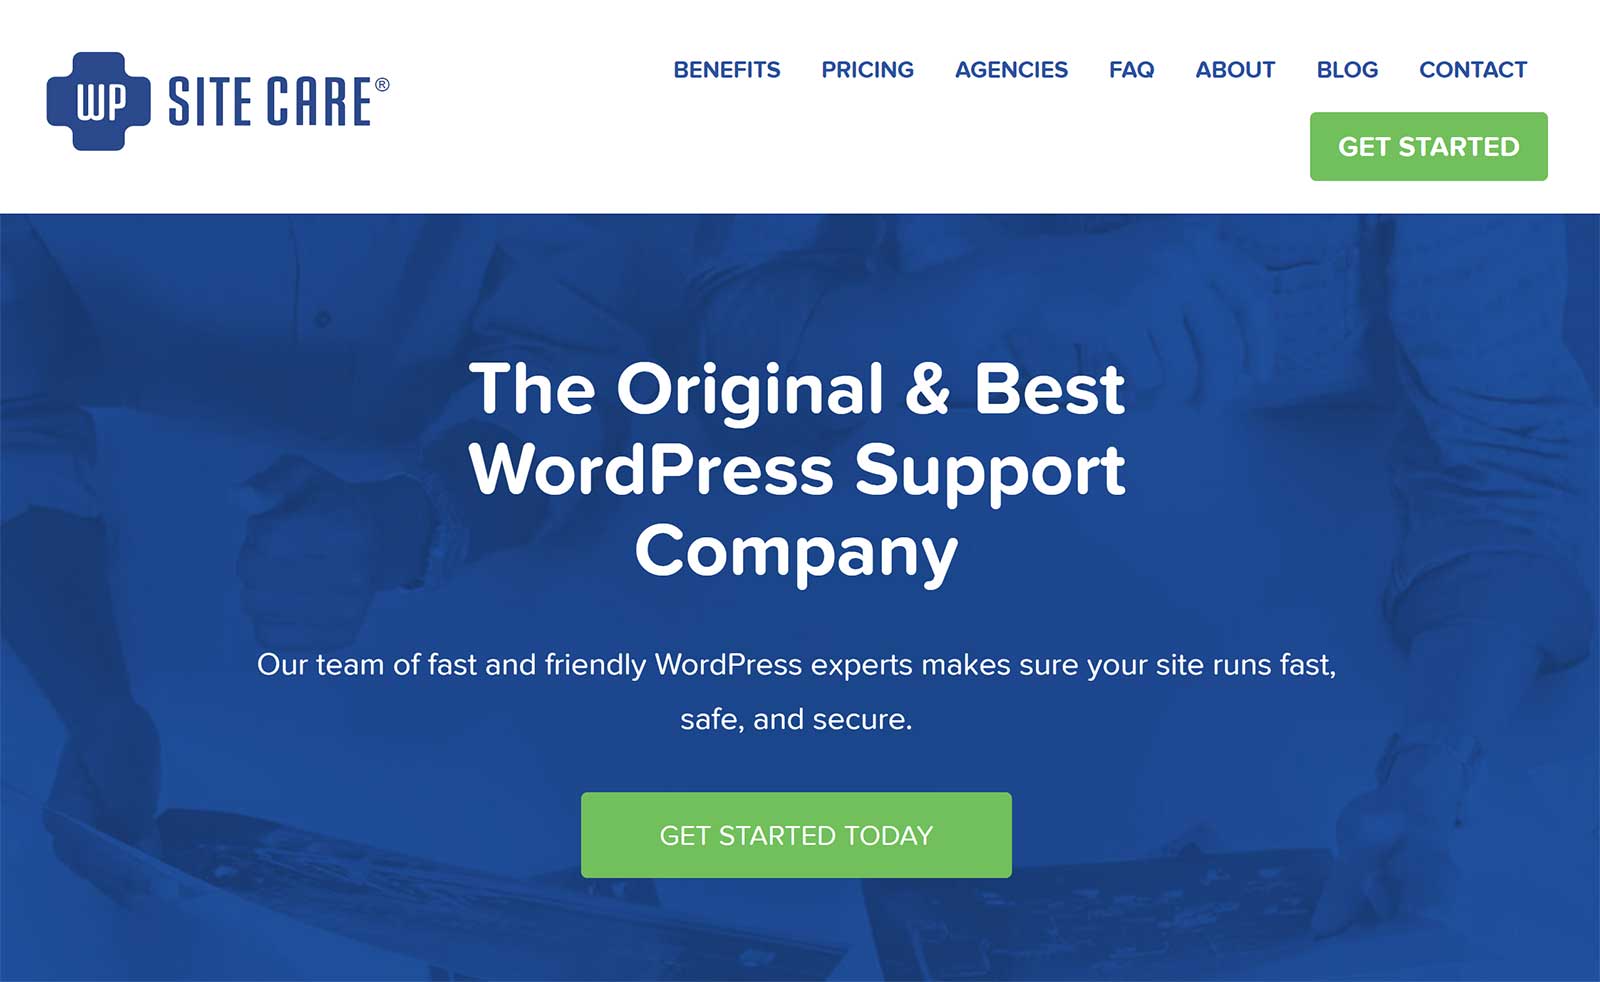 WP Site Care WordPress Support